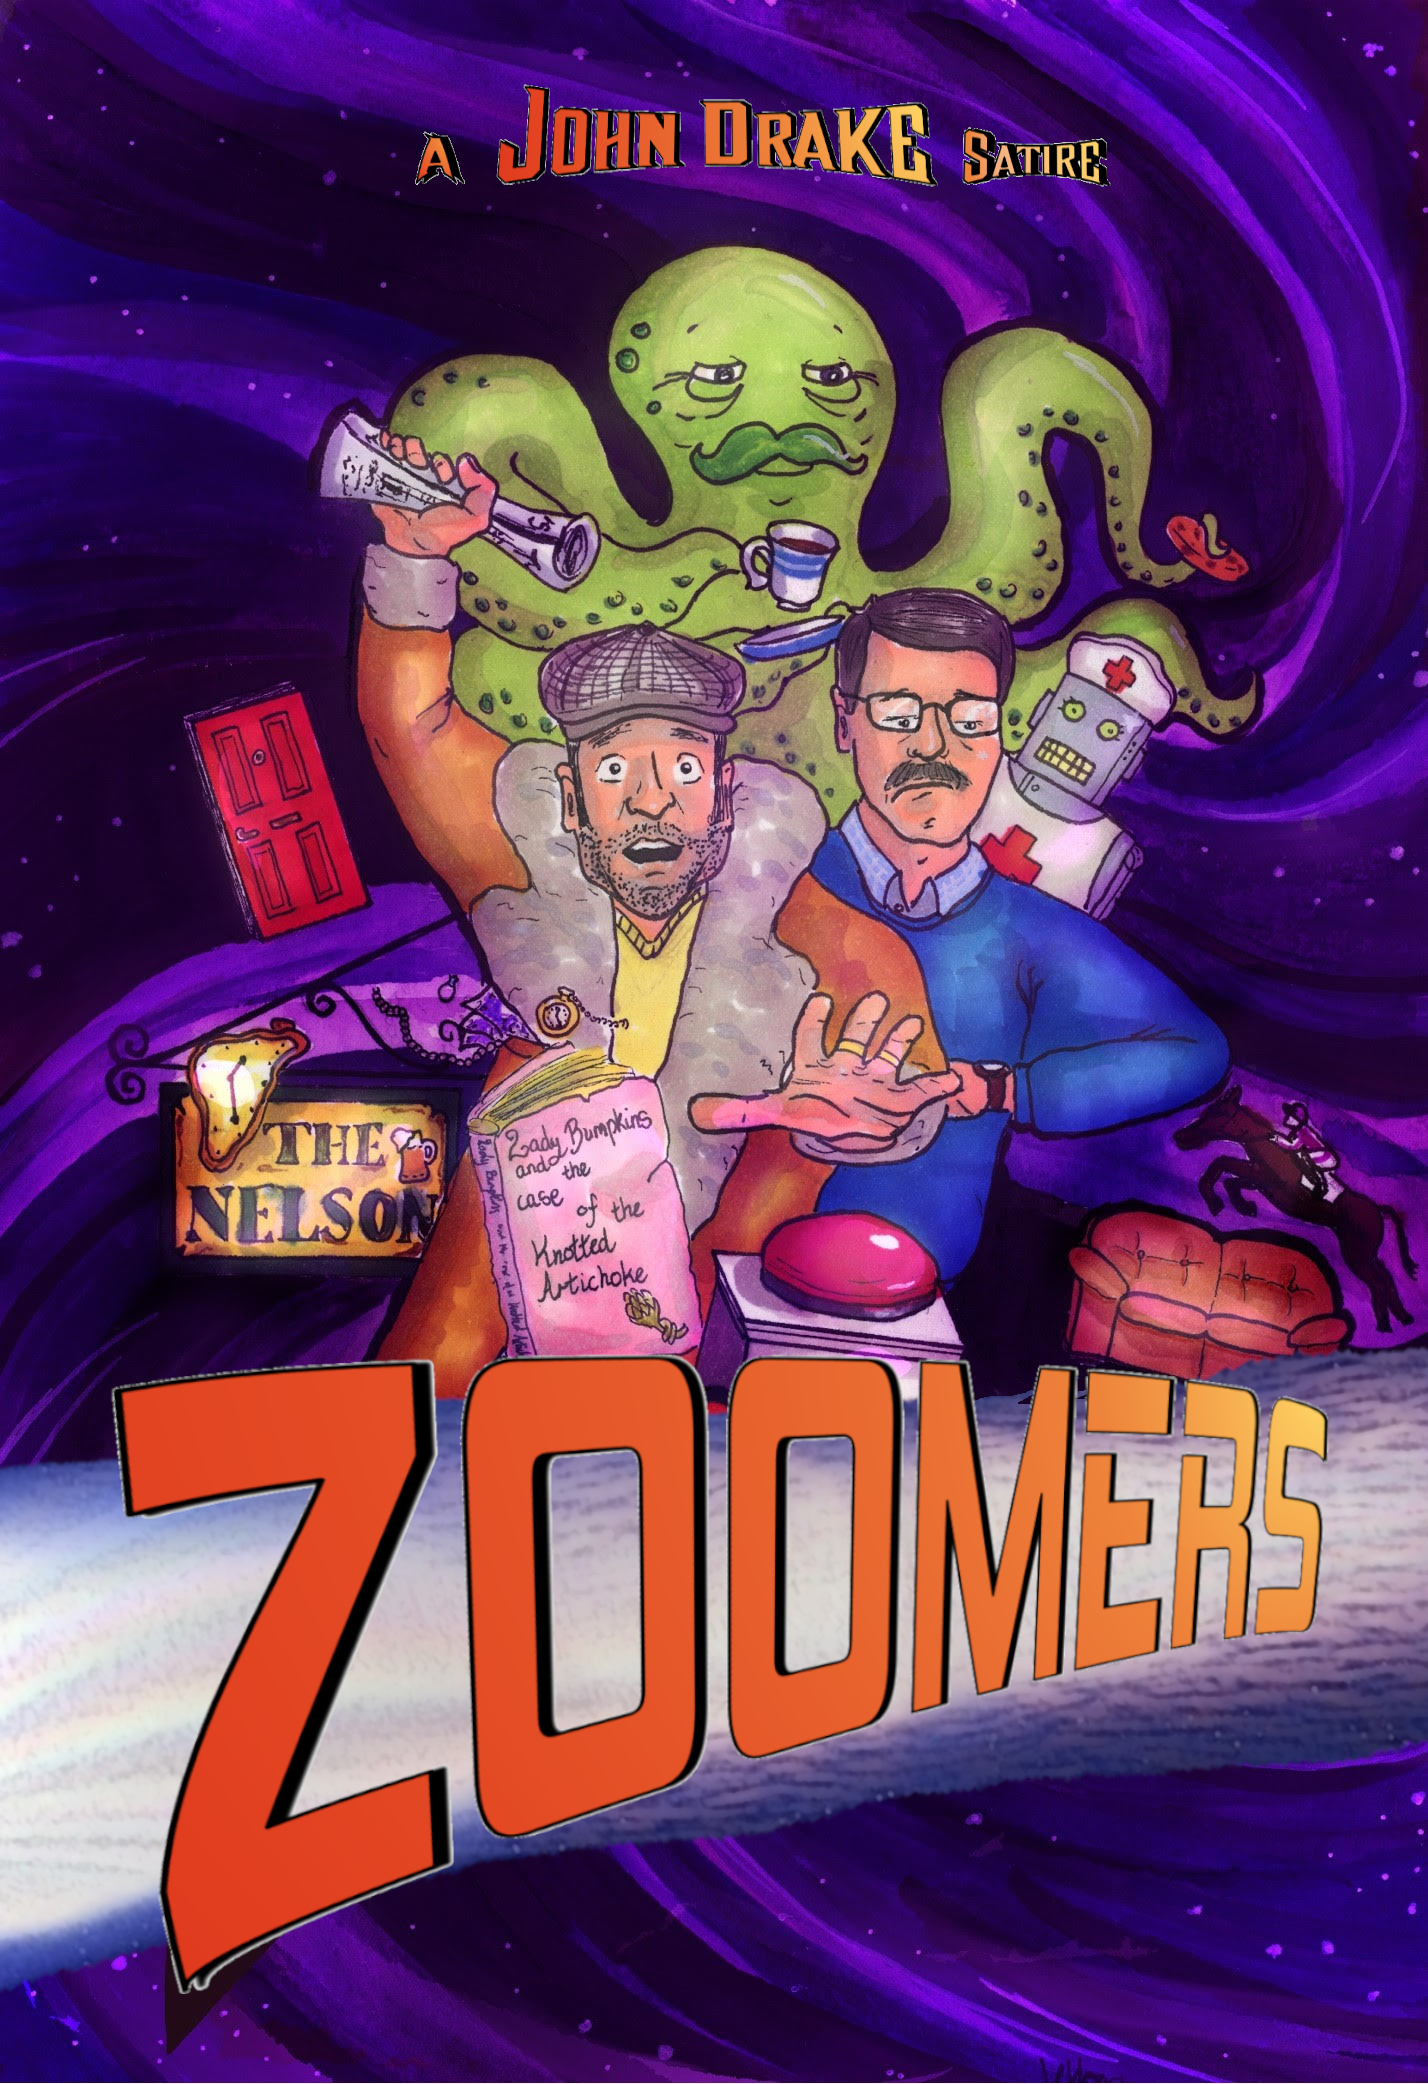 Laughed lately? Well, why not? You need a pick me up and we have the perfect thing to make you smile. In less than a week, Zoomers, the next great Science Fiction Comedy by John Drake drops June 1st